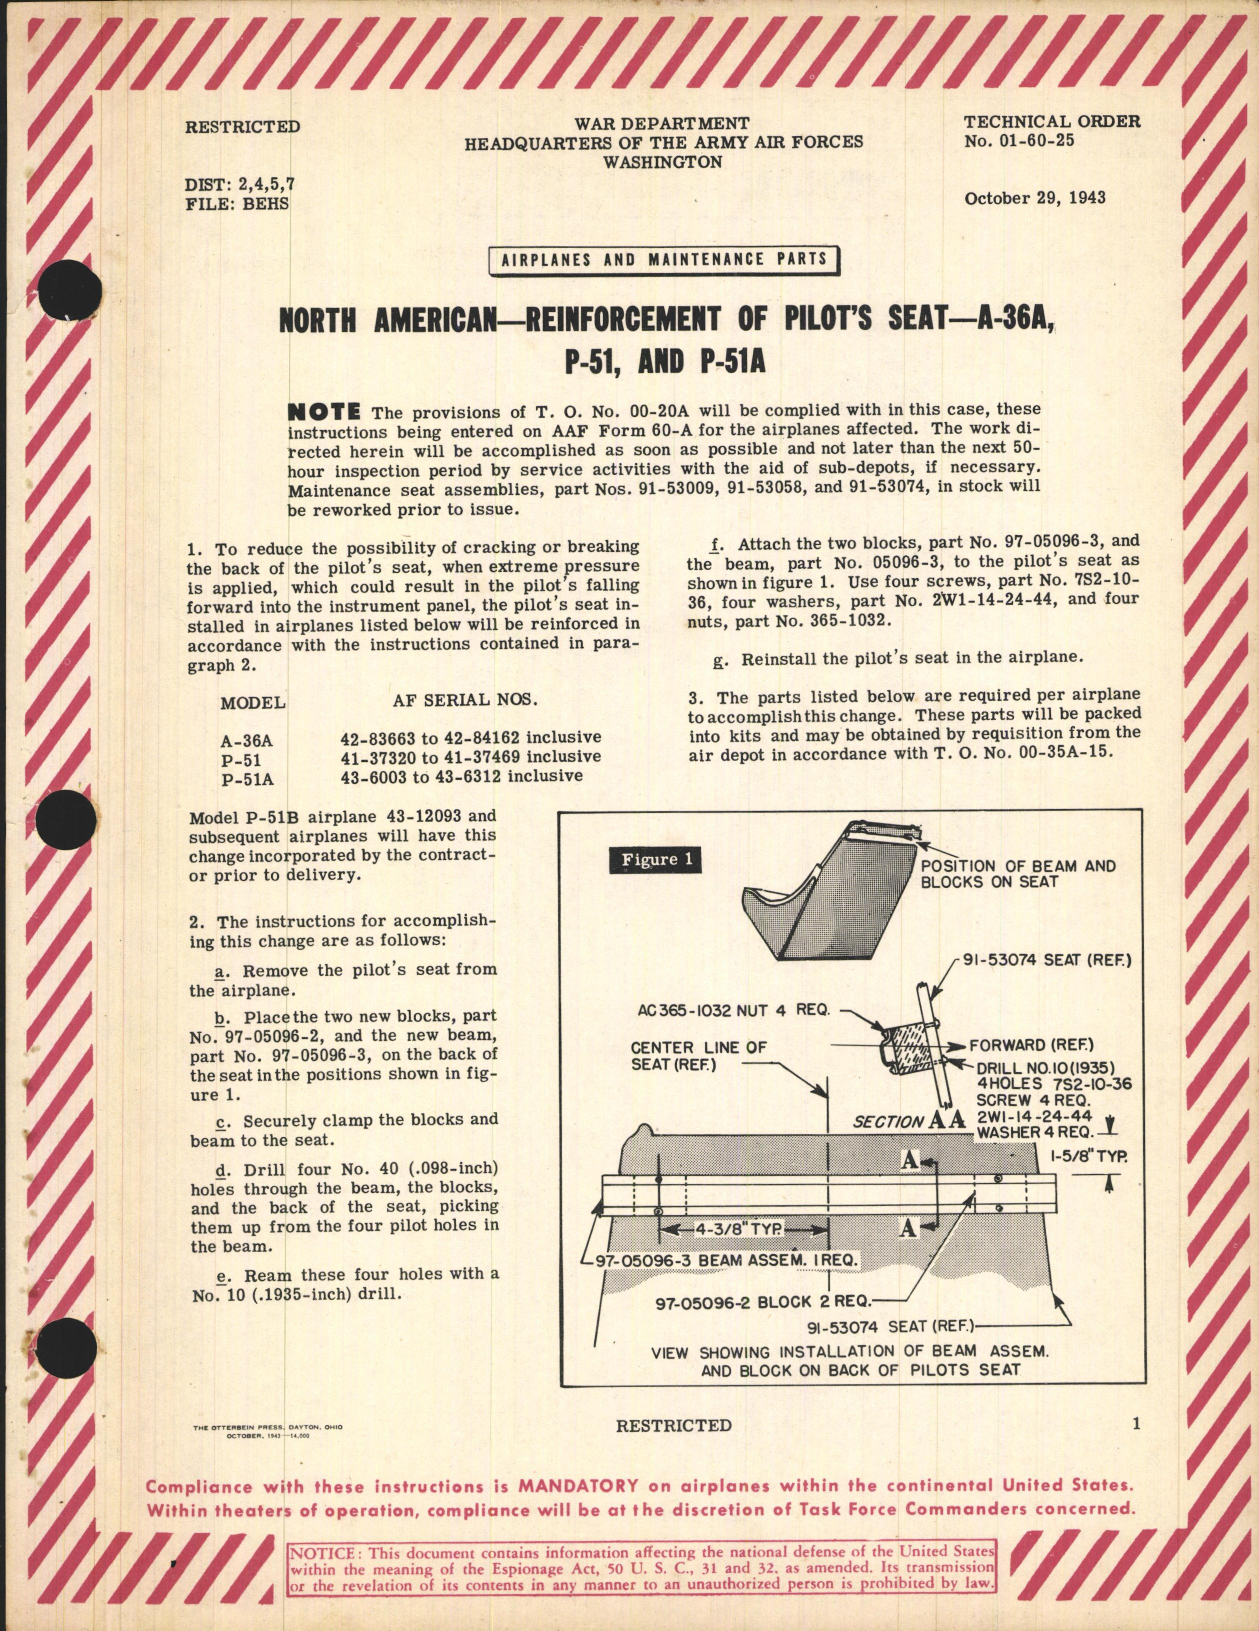 Sample page 1 from AirCorps Library document: Reinforcement of Pilot's Seat for A-36A, P-51, and P-51A